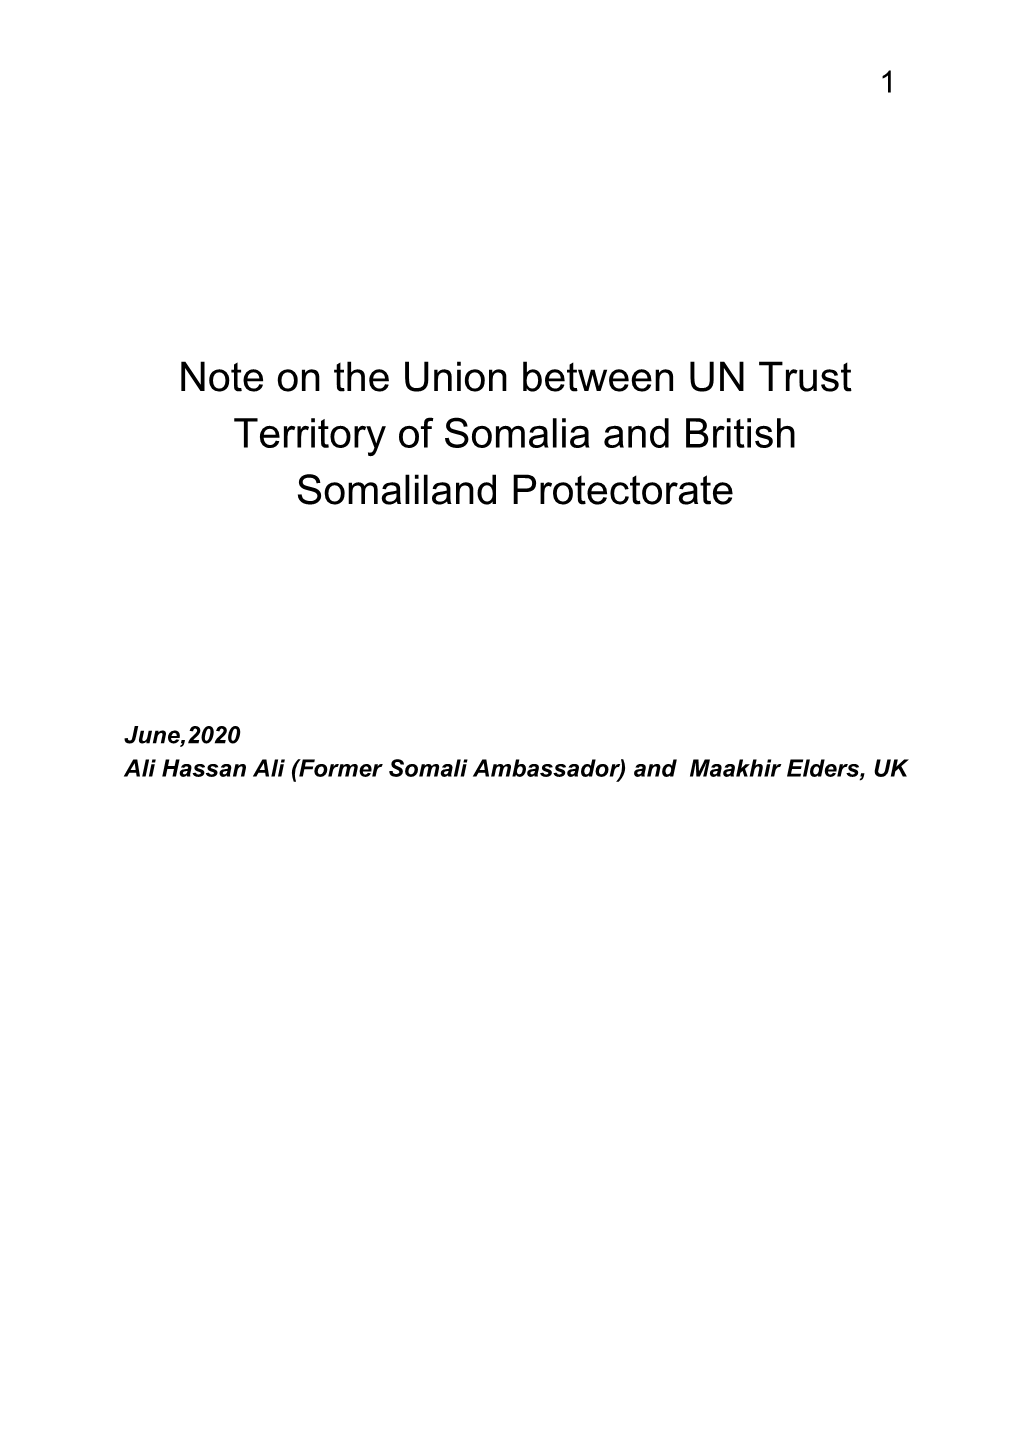 Note on the Union Between UN Trust Territory of Somalia and British Somaliland Protectorate